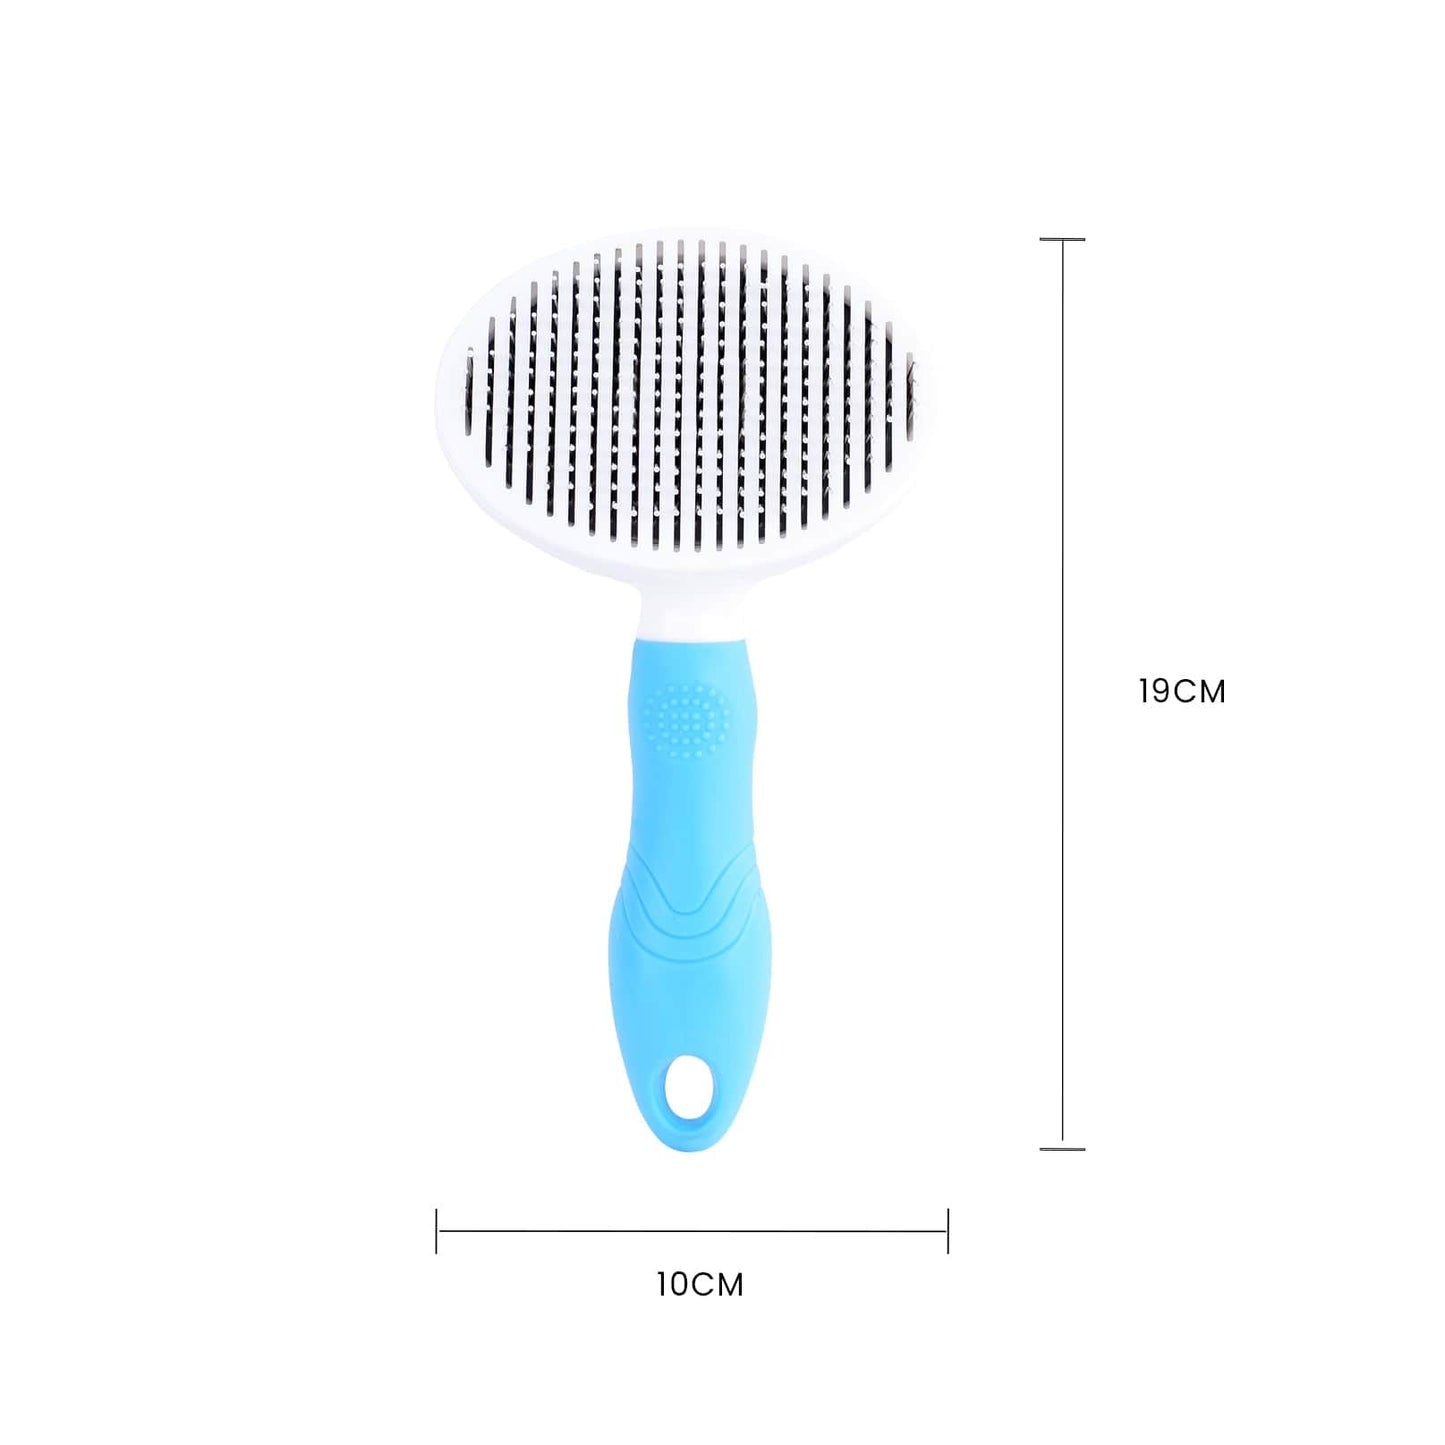 Living Today Pets Easy Clean Pet Grooming Brush